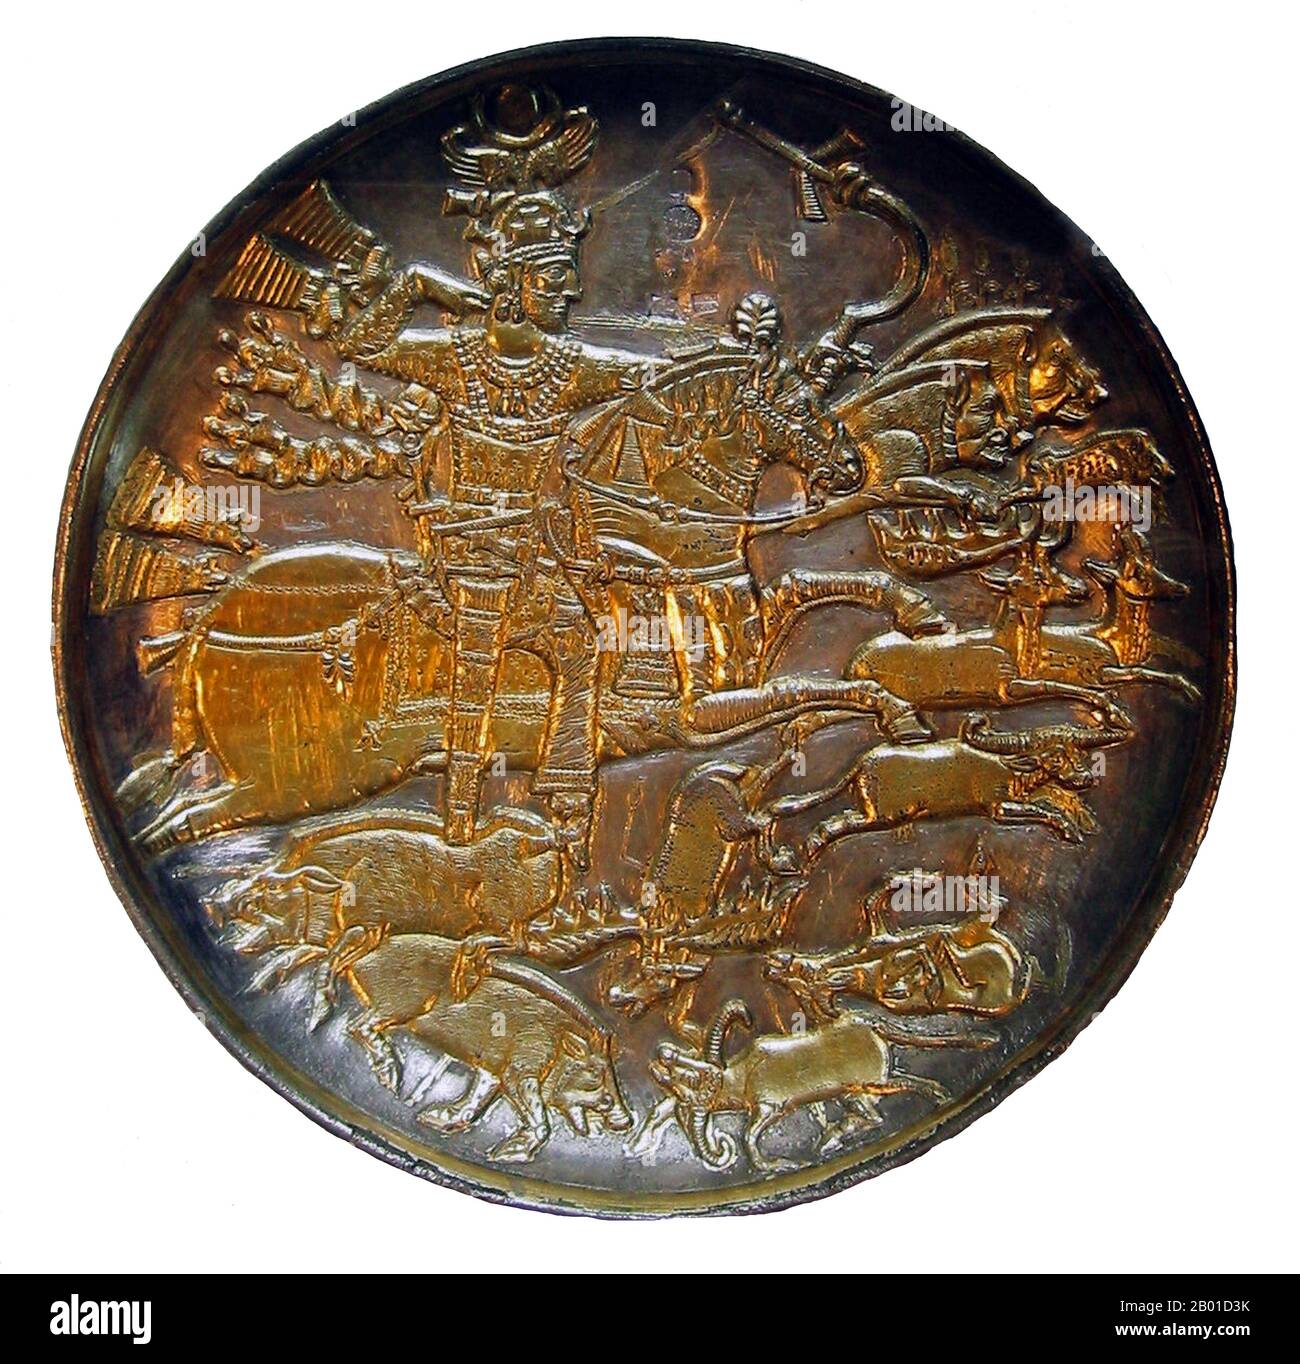 Iran: Hunting scene on a gilded silver bowl depicting King Khosrau I (512/514-579 CE), 7th century. Photo by World Imaging (CC BY-SA 3.0 License).  Khosrau I (also called Xusro, Khosnow, Chusro, Khusro, Husraw or Khosrow, Chosroes in classical sources, most commonly known in Persian as Anushirvan, meaning the Immortal Soul), also known as Anushiravan the Just (r. 531-579), was the 25th Sassanid 'Shahanshah' (King of Kings) of Persia, and the most famous and celebrated of the Sasanian rulers. Stock Photo